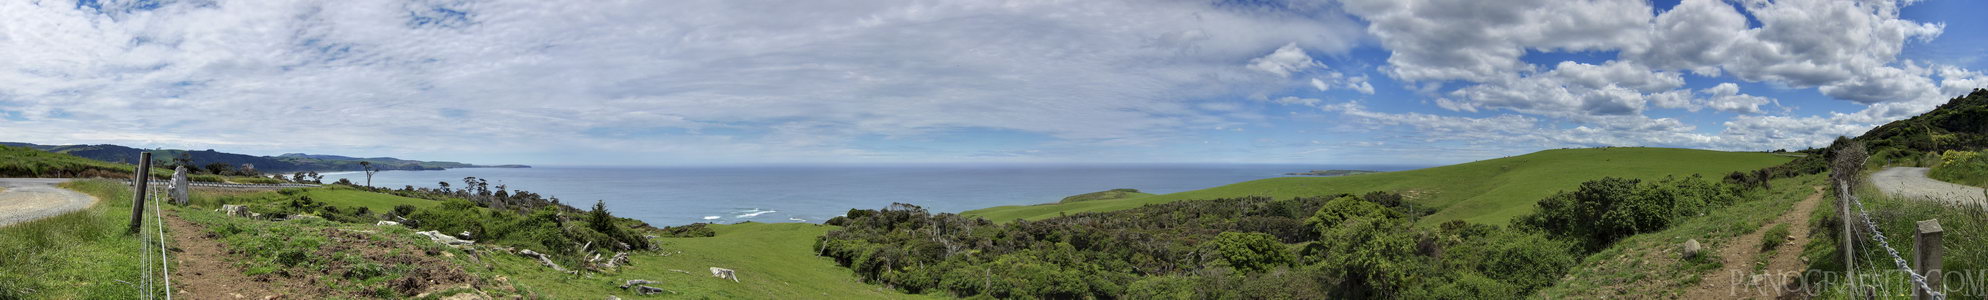 Florence Hill HDR - The coast line from Florence Hill Lookout in the Catlins